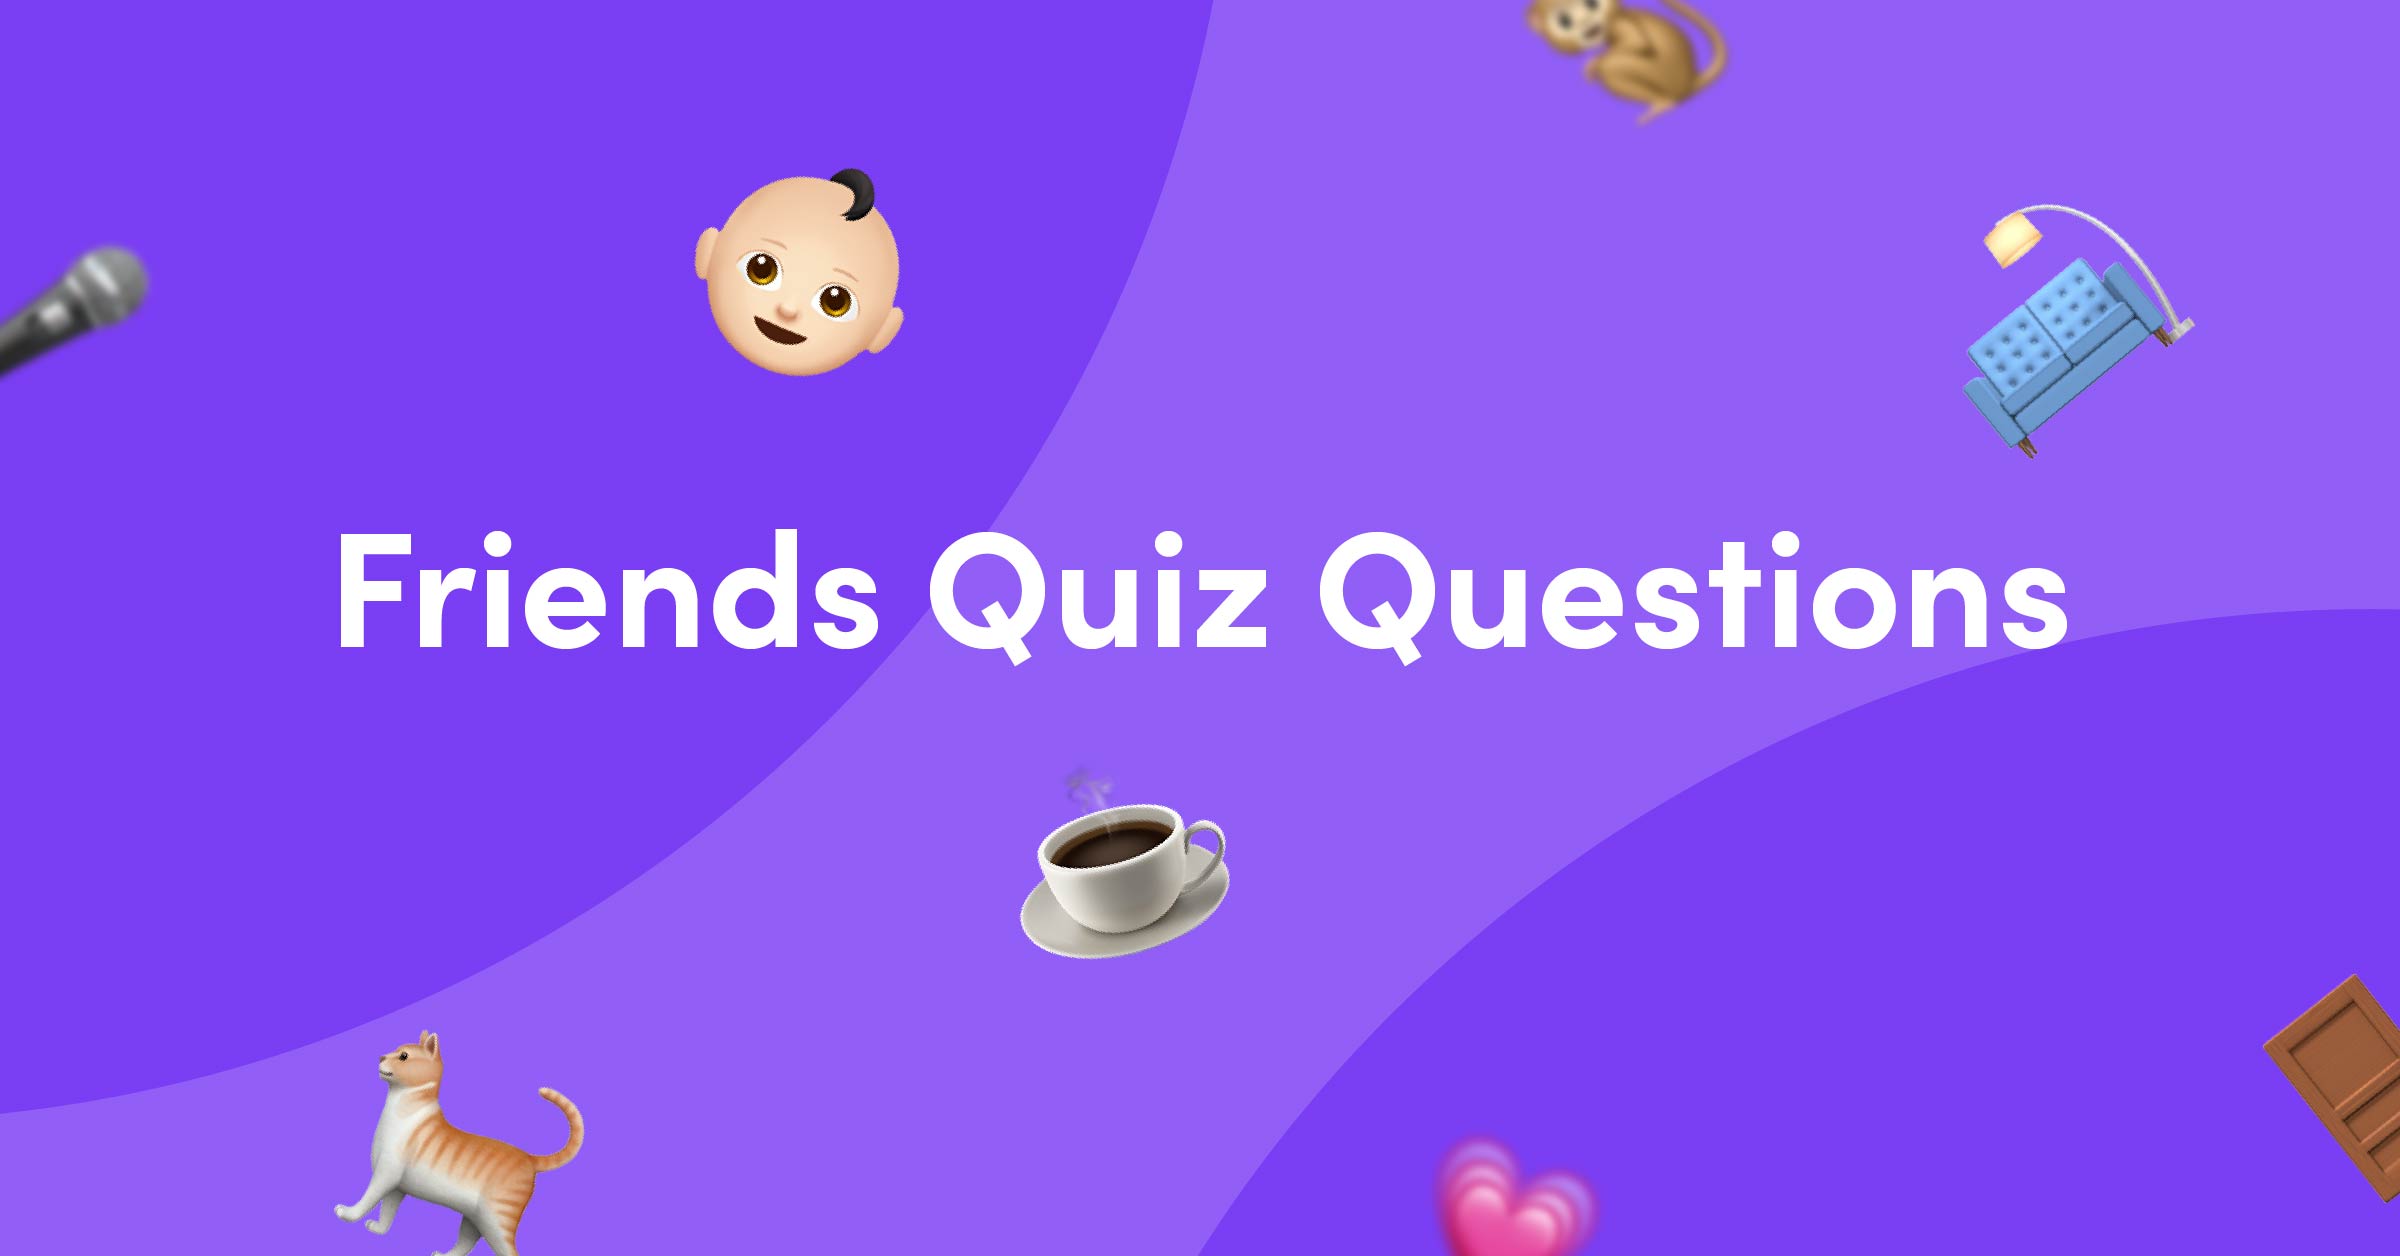 50 Friends Quiz Questions and Answers - Kwizzbit